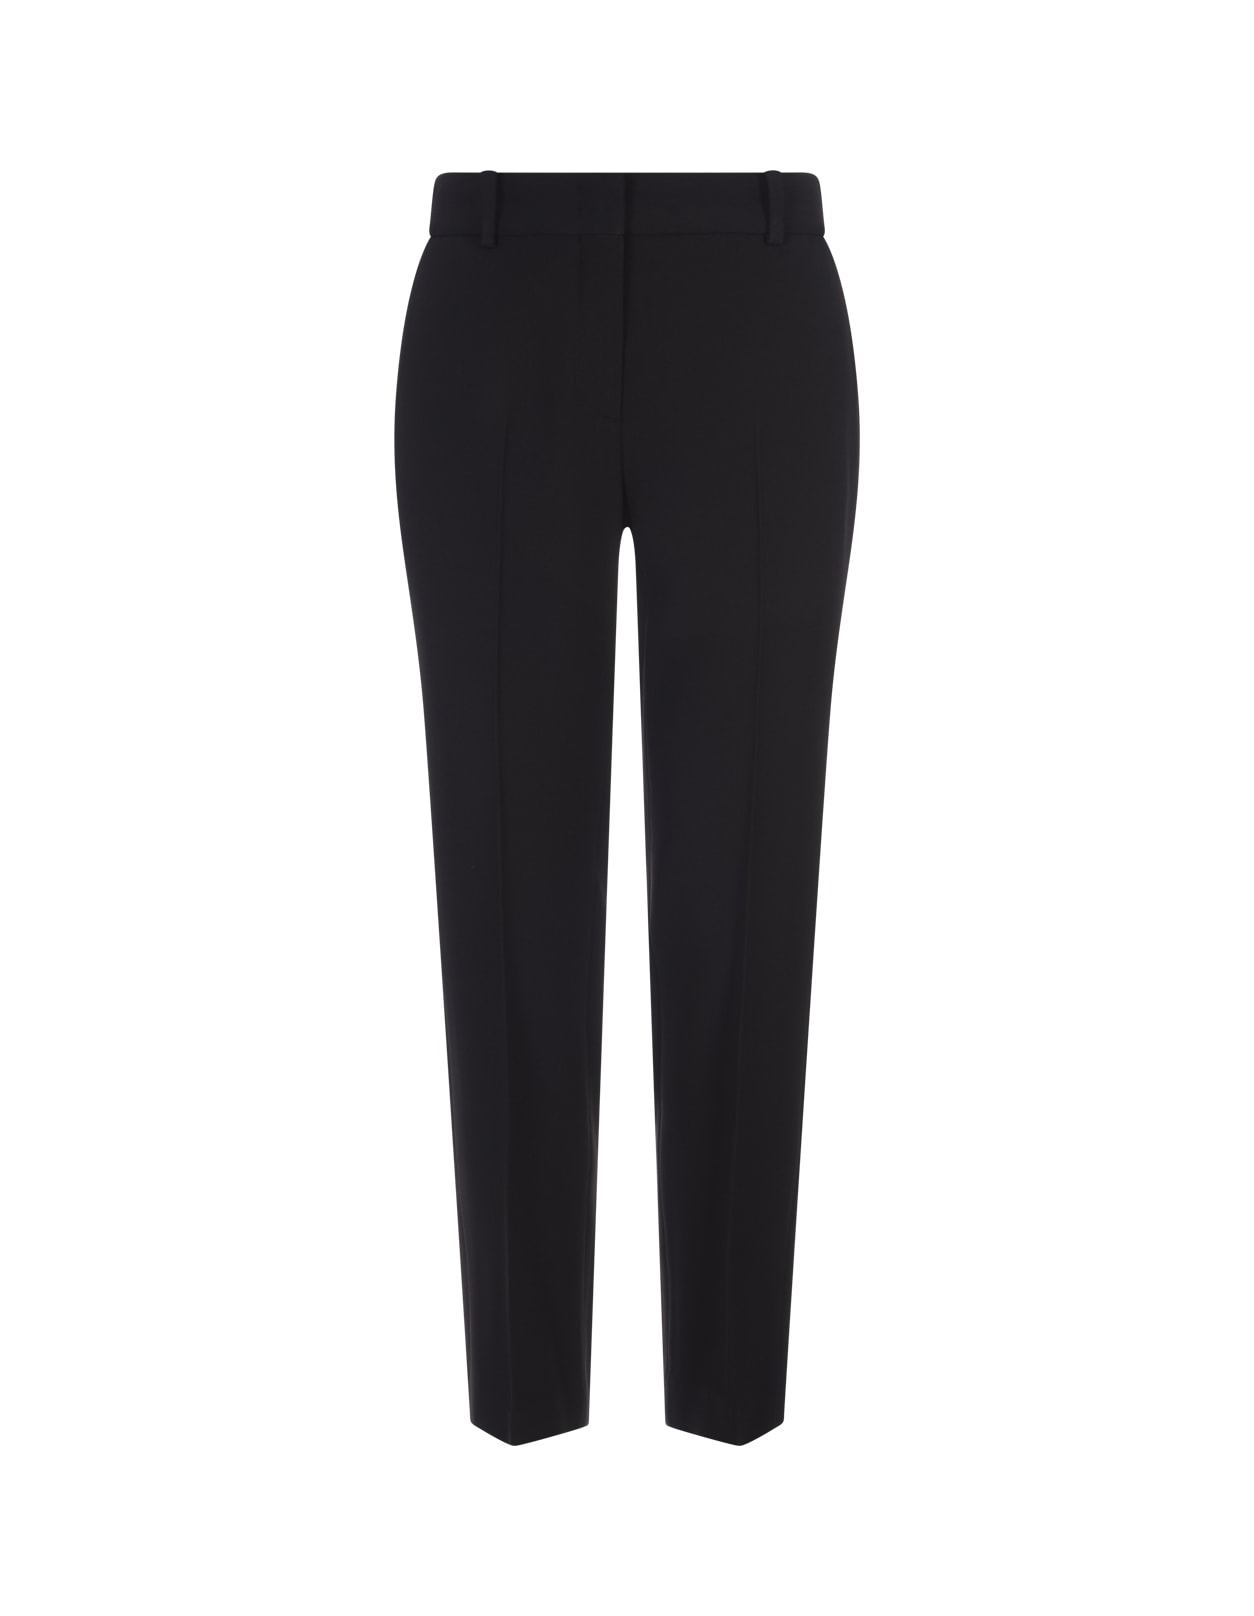 ERMANNO SCERVINO BLACK TAPERED TAILORED TROUSERS